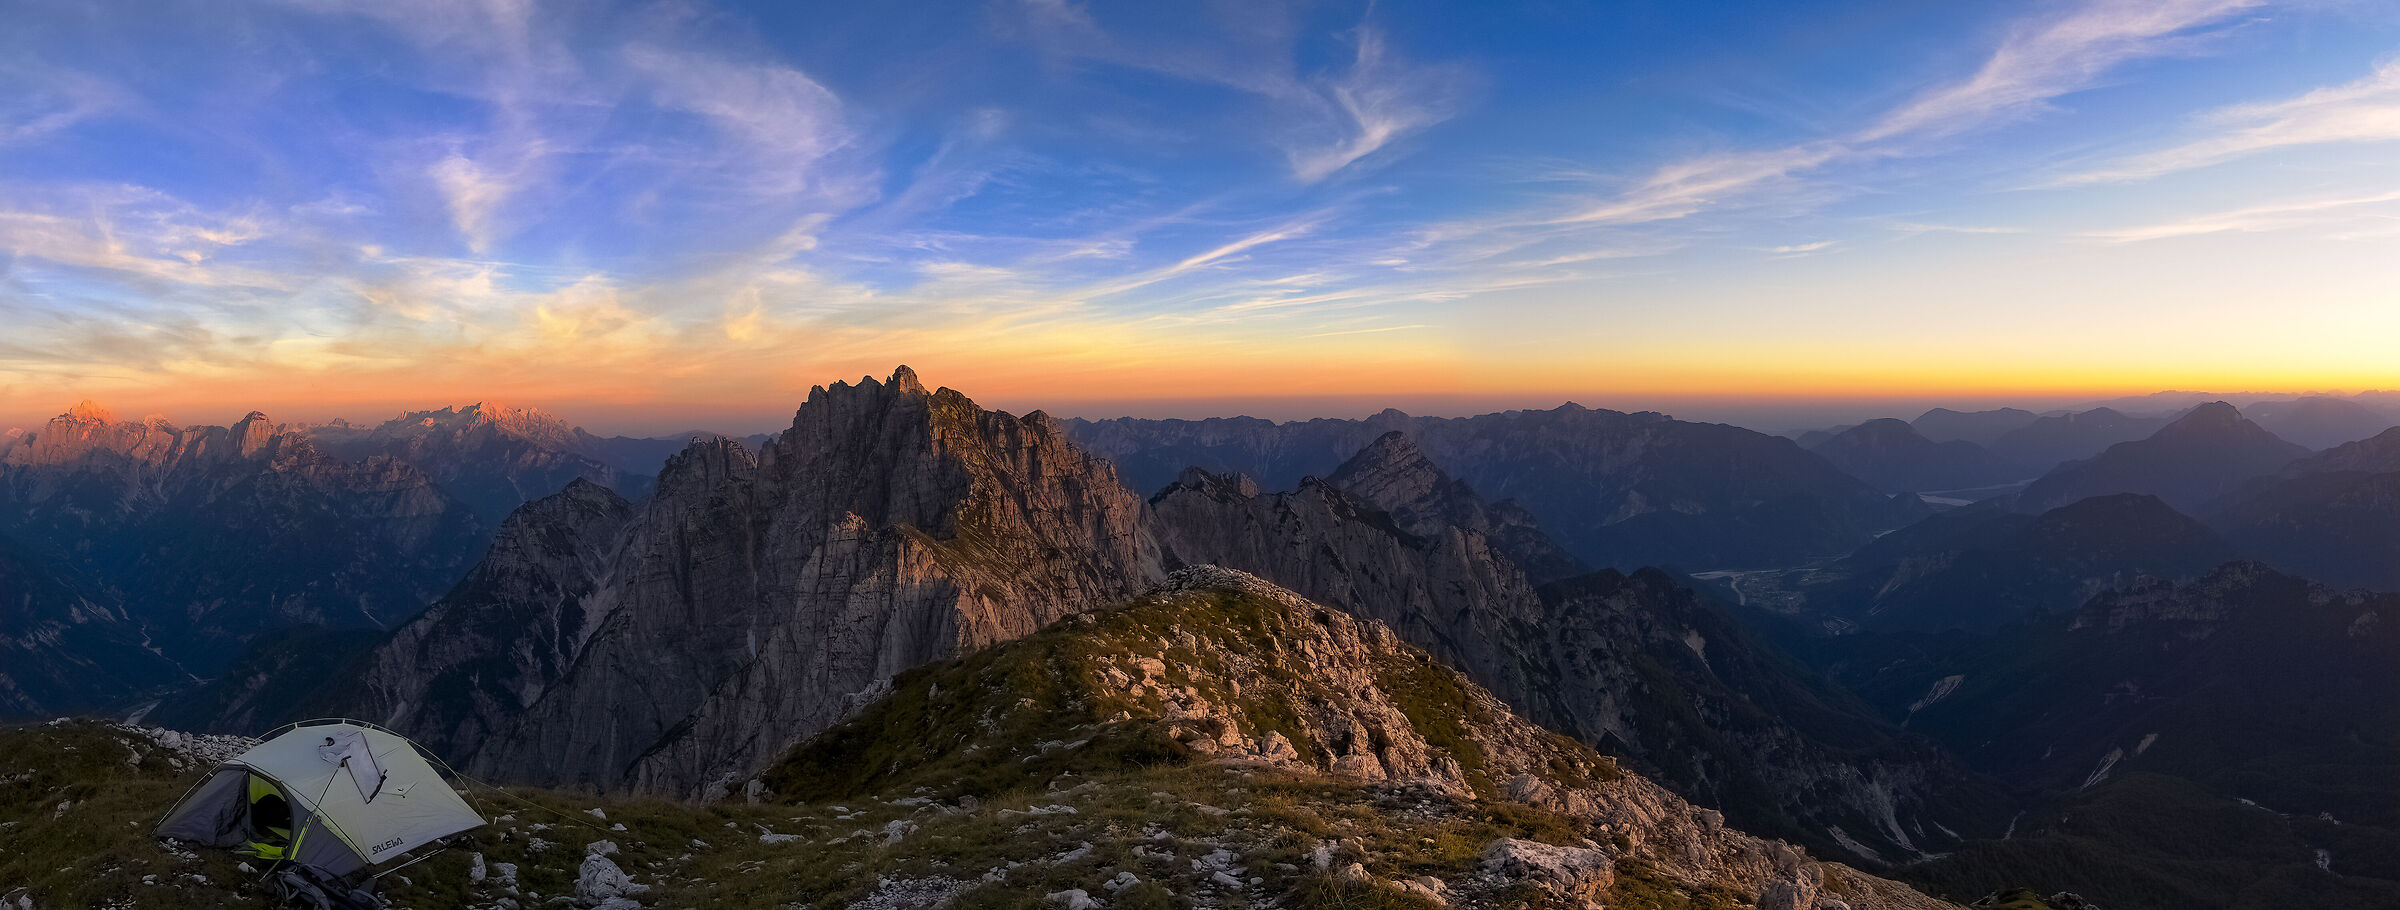 Sunset at high altitude, Carnic Alps...